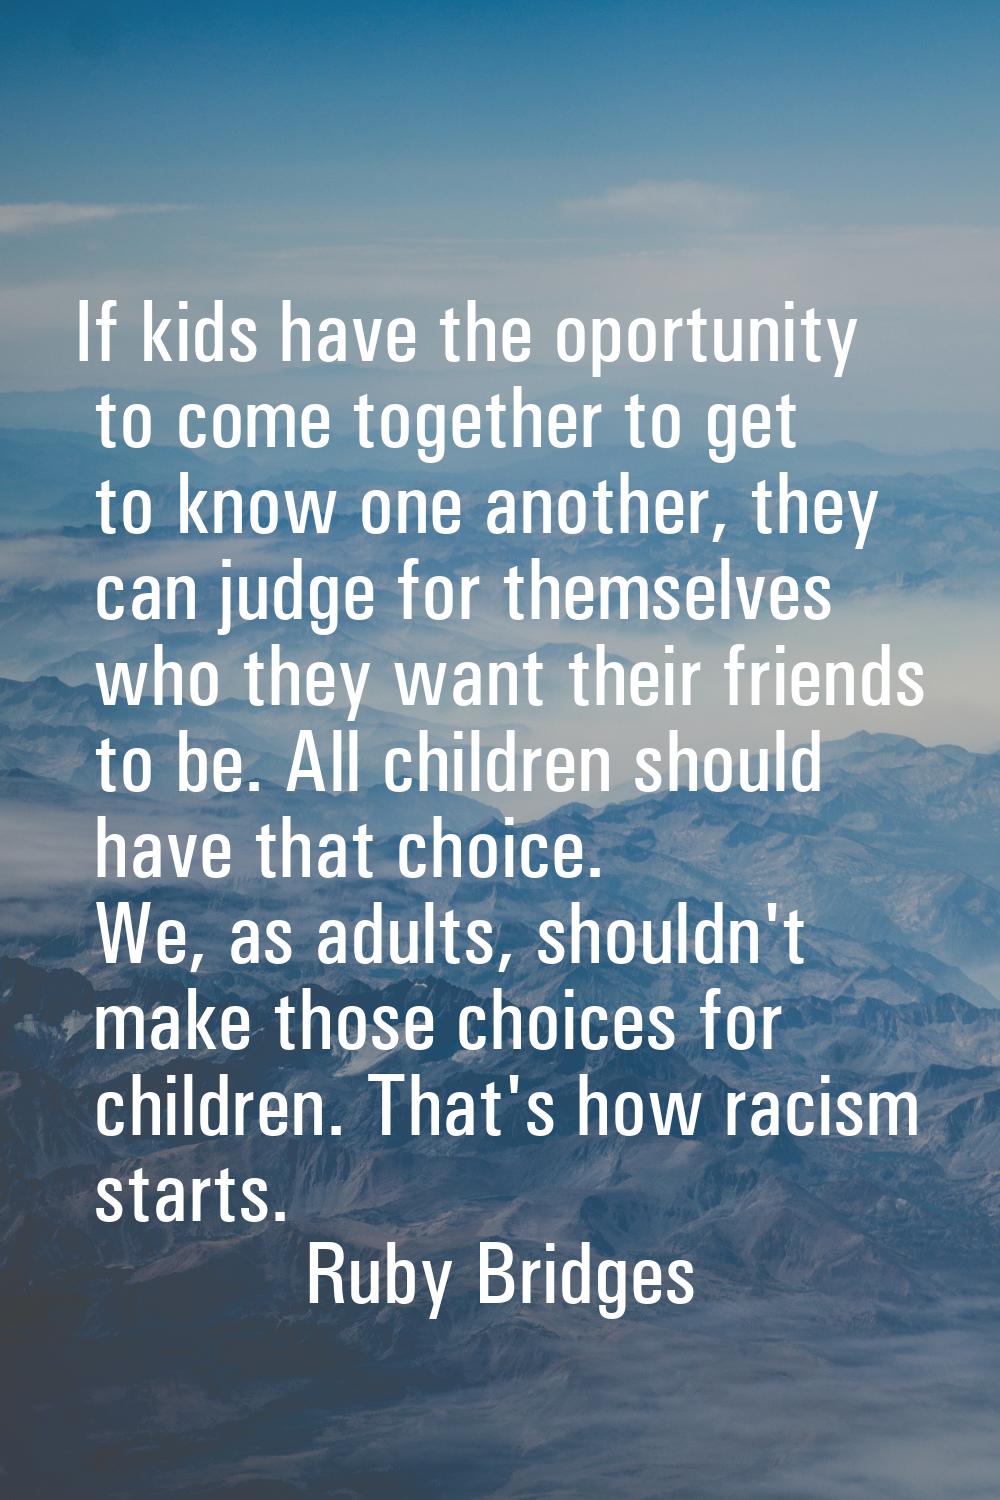 If kids have the oportunity to come together to get to know one another, they can judge for themsel